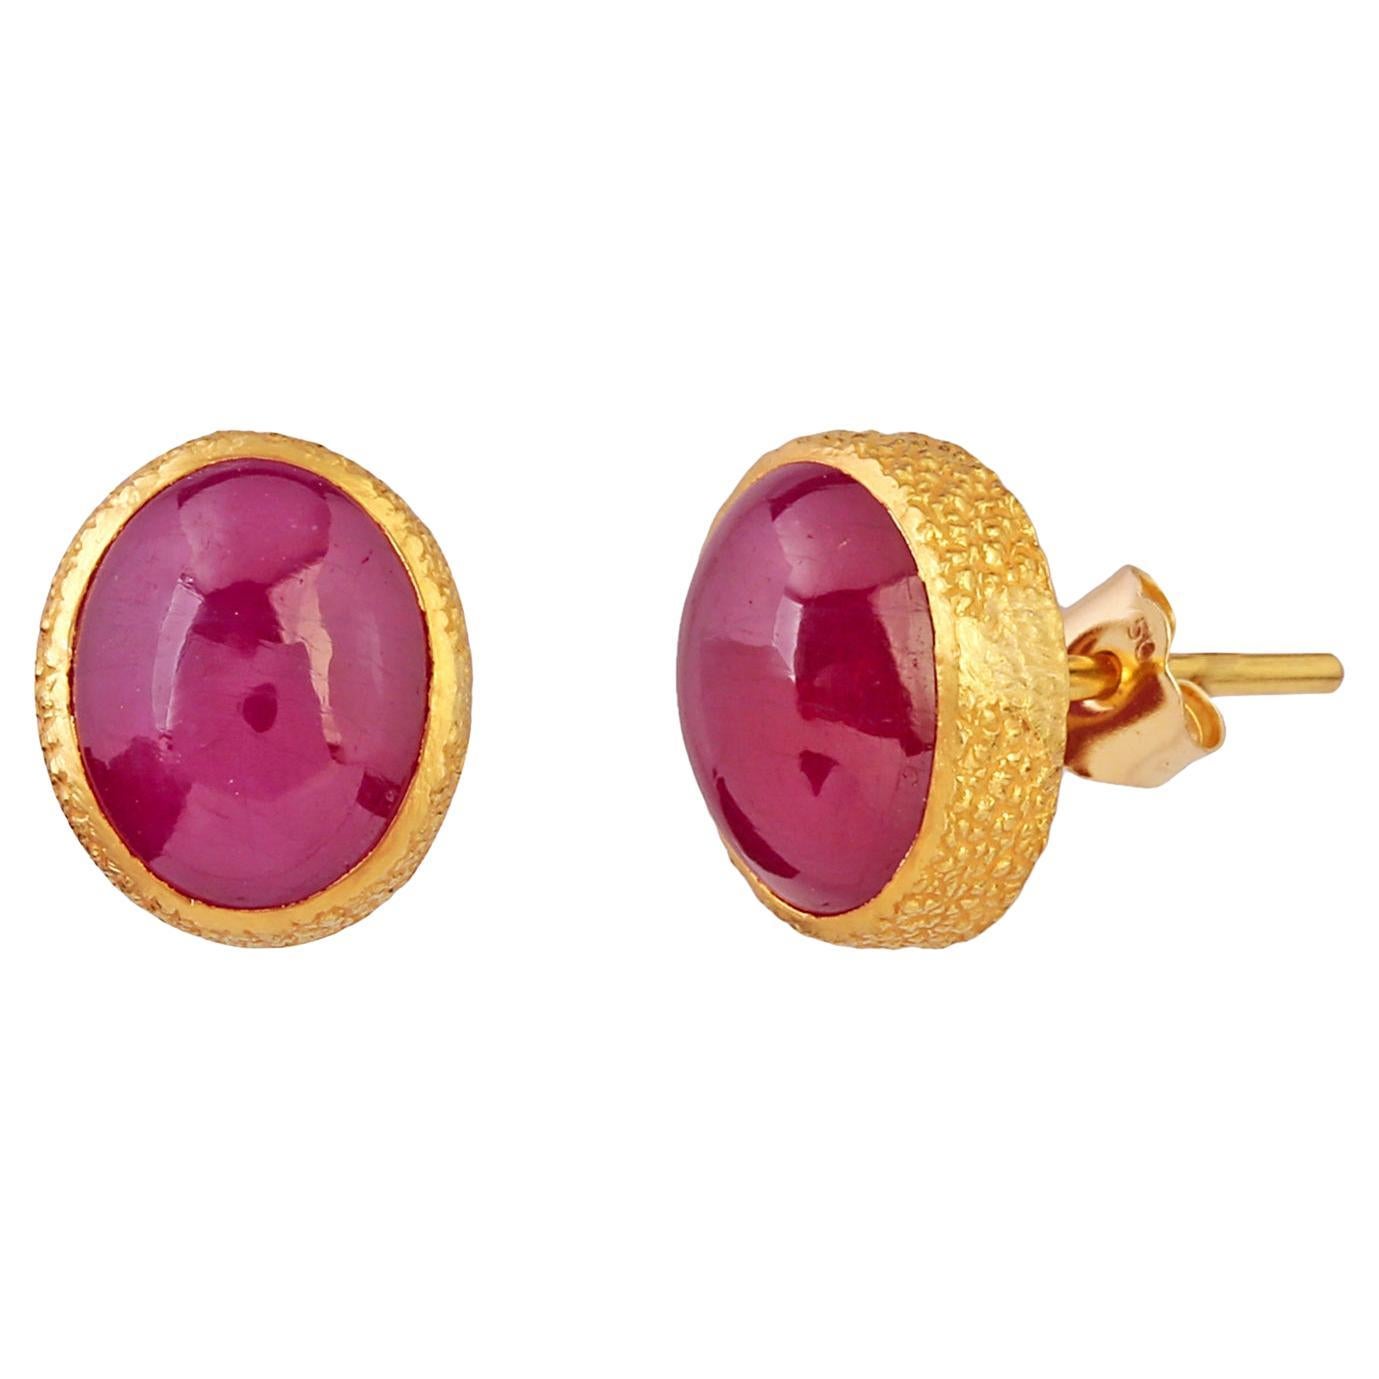 Ruby Stud Earrings with 18k Gold